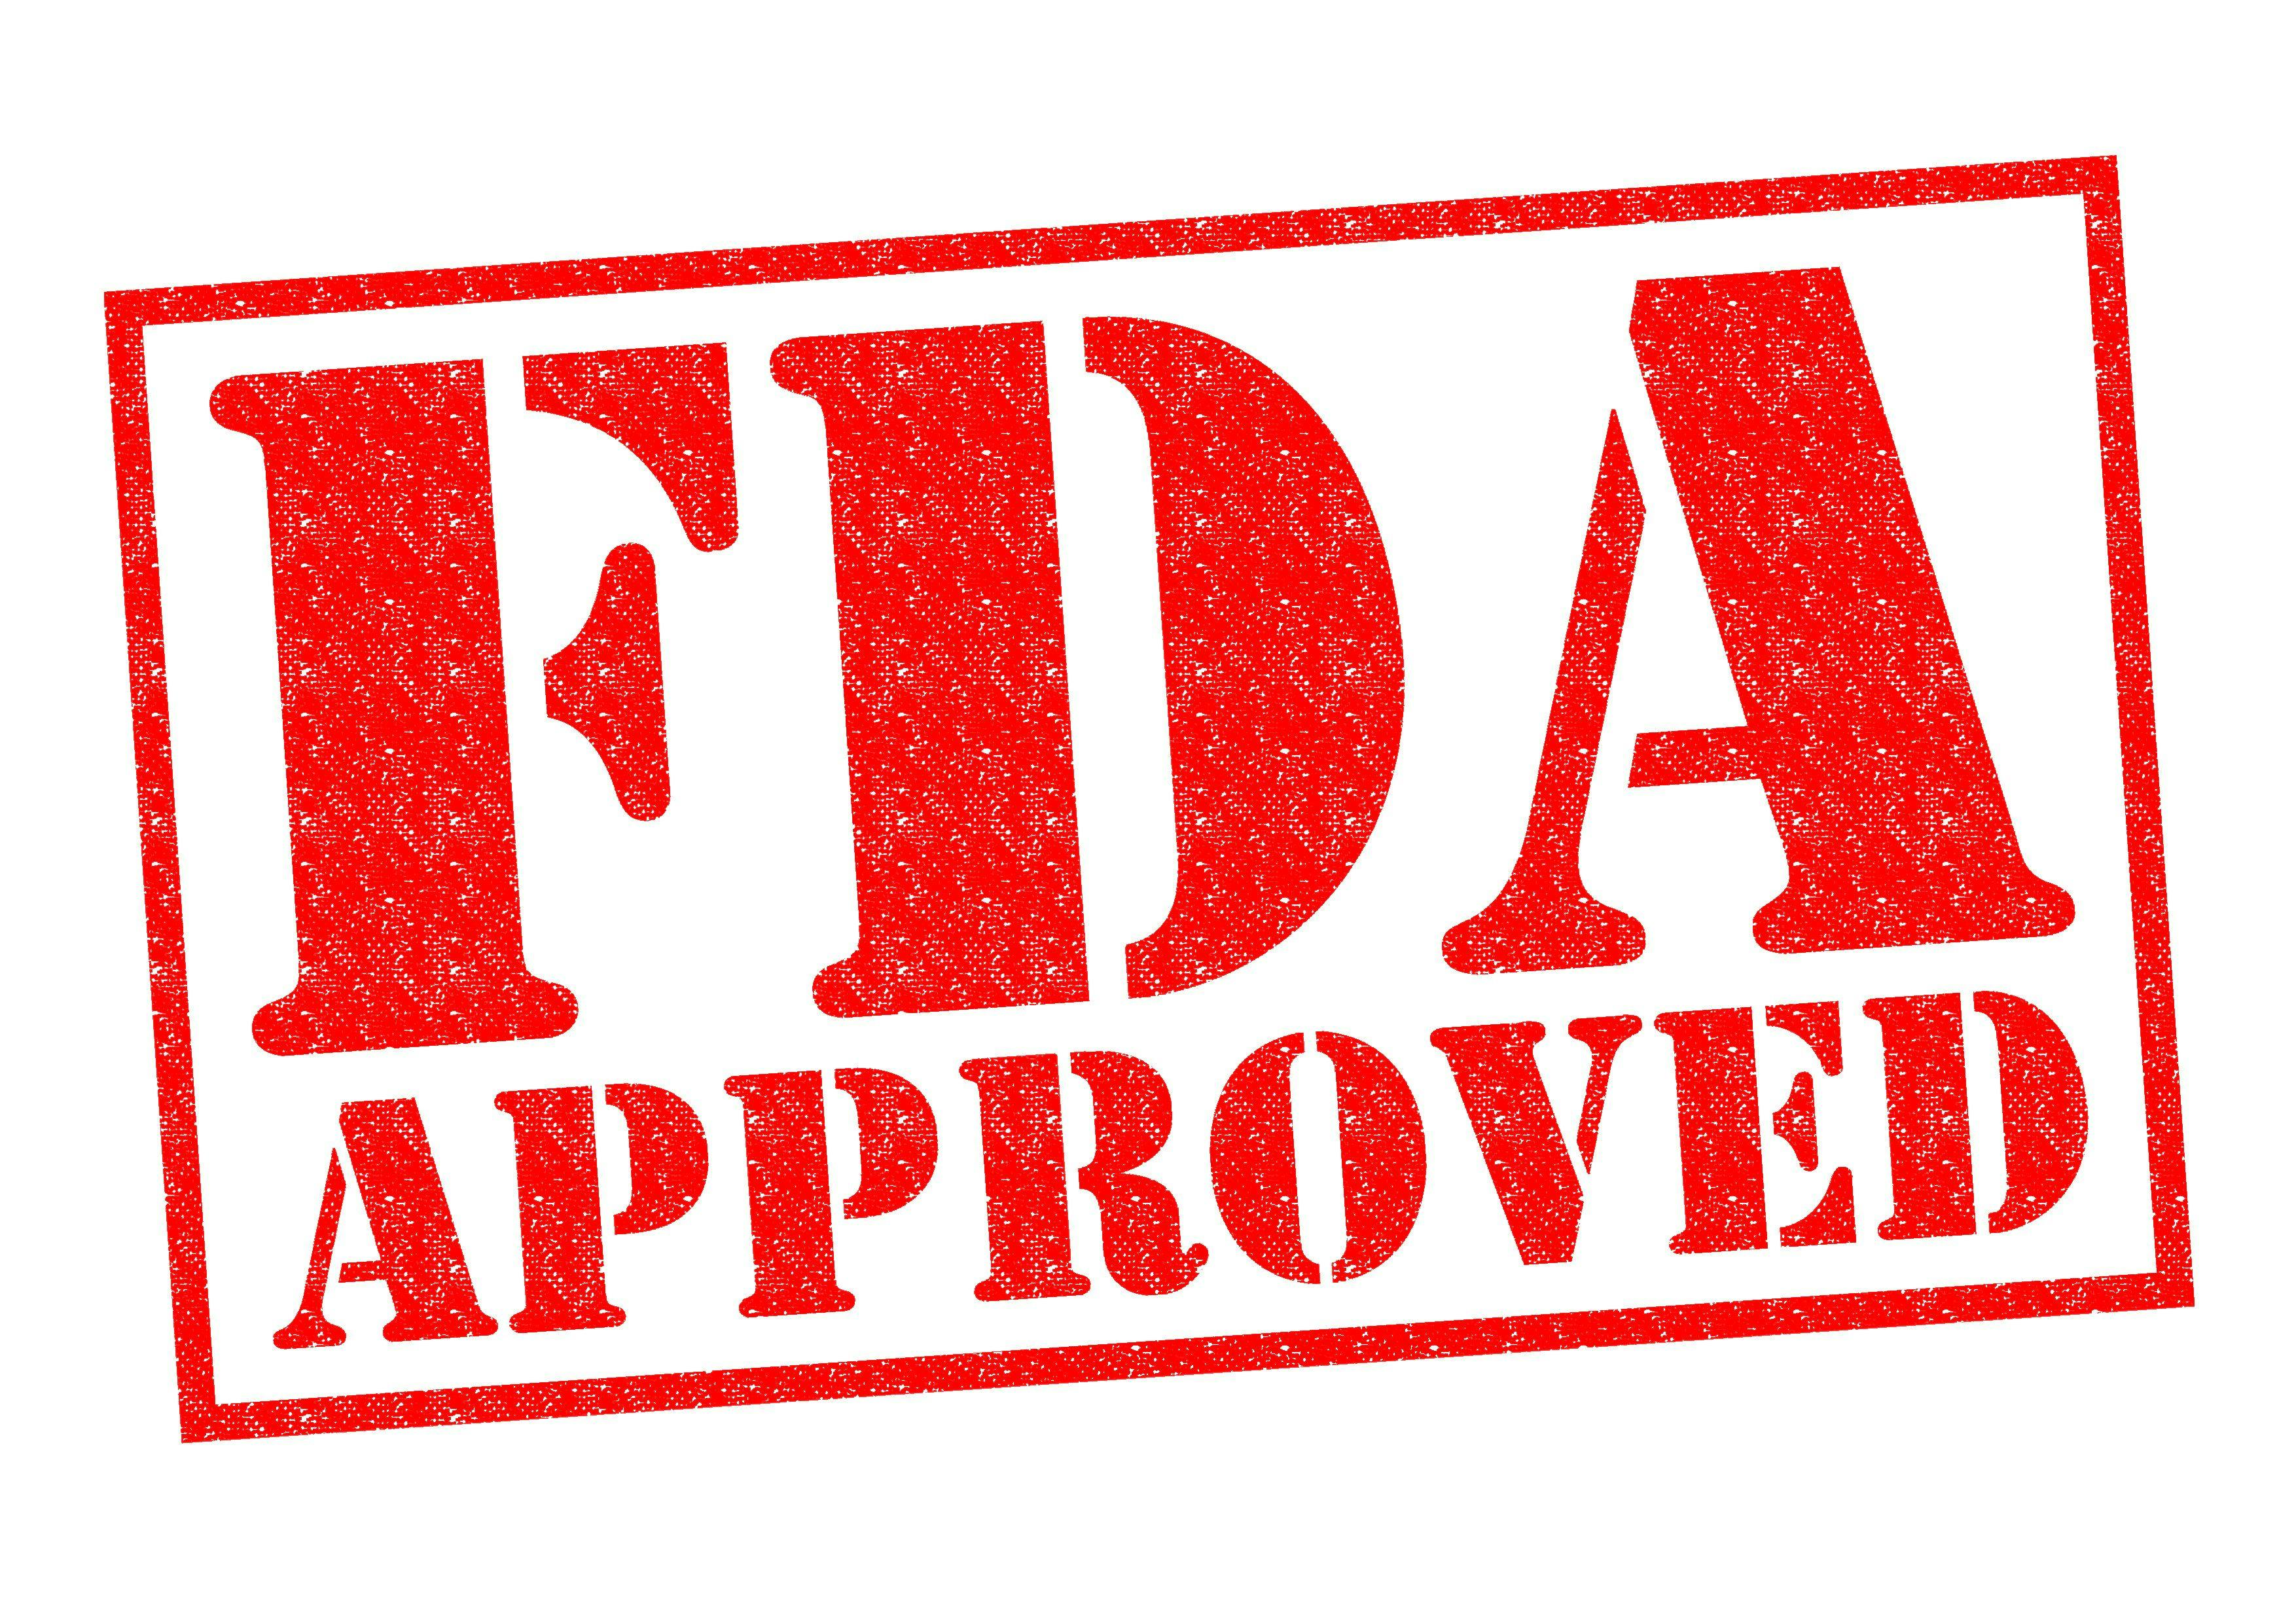 FDA Approves Upadacitinib for Moderate to Severe AD